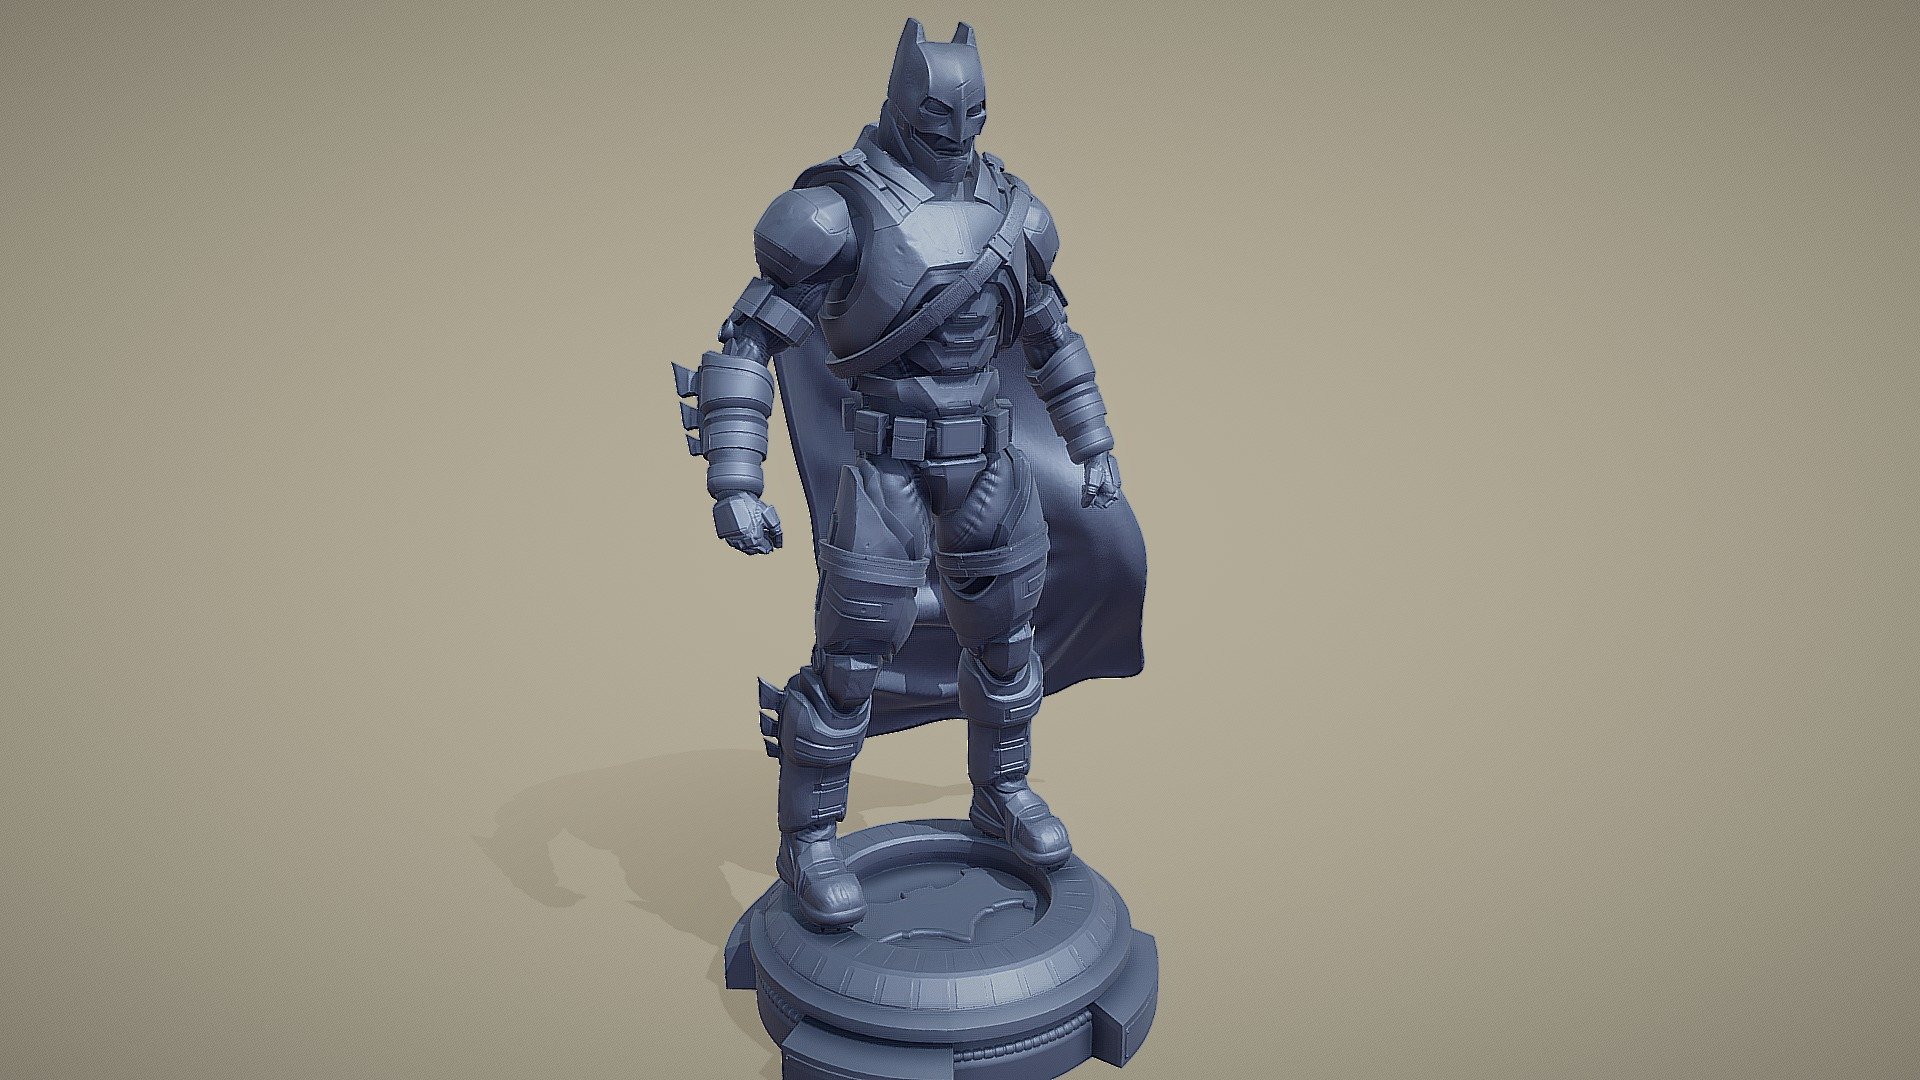 Batman for 3D printing
STL files are ready for 3D printing.
You can print this
STL-226mm (1-10)
STL-91mm (1-24)
STL-70mm (1-32) - Batman for 3D printing - Buy Royalty Free 3D model by crazysculptor 3d model